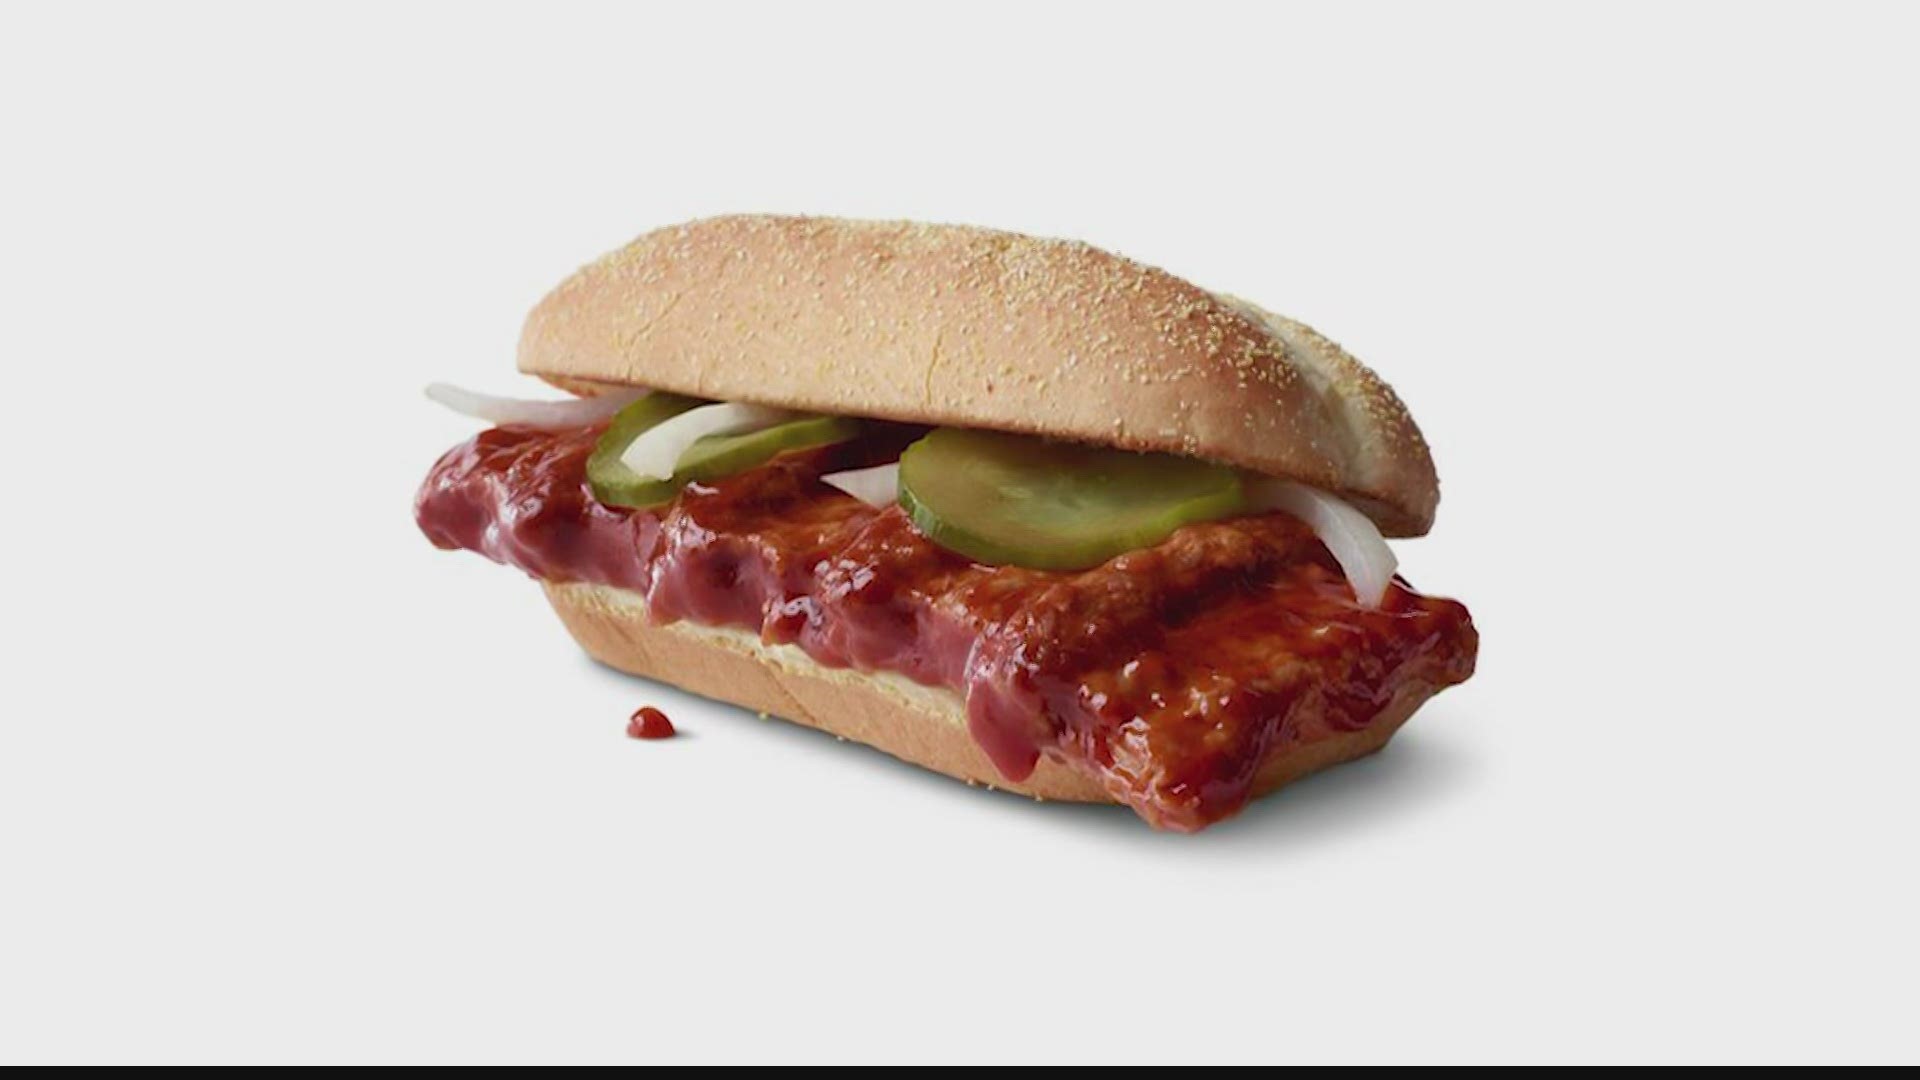 Do you think the McRib will be taken off the menu for good? Or will it come back for a few more "farewell tours"?